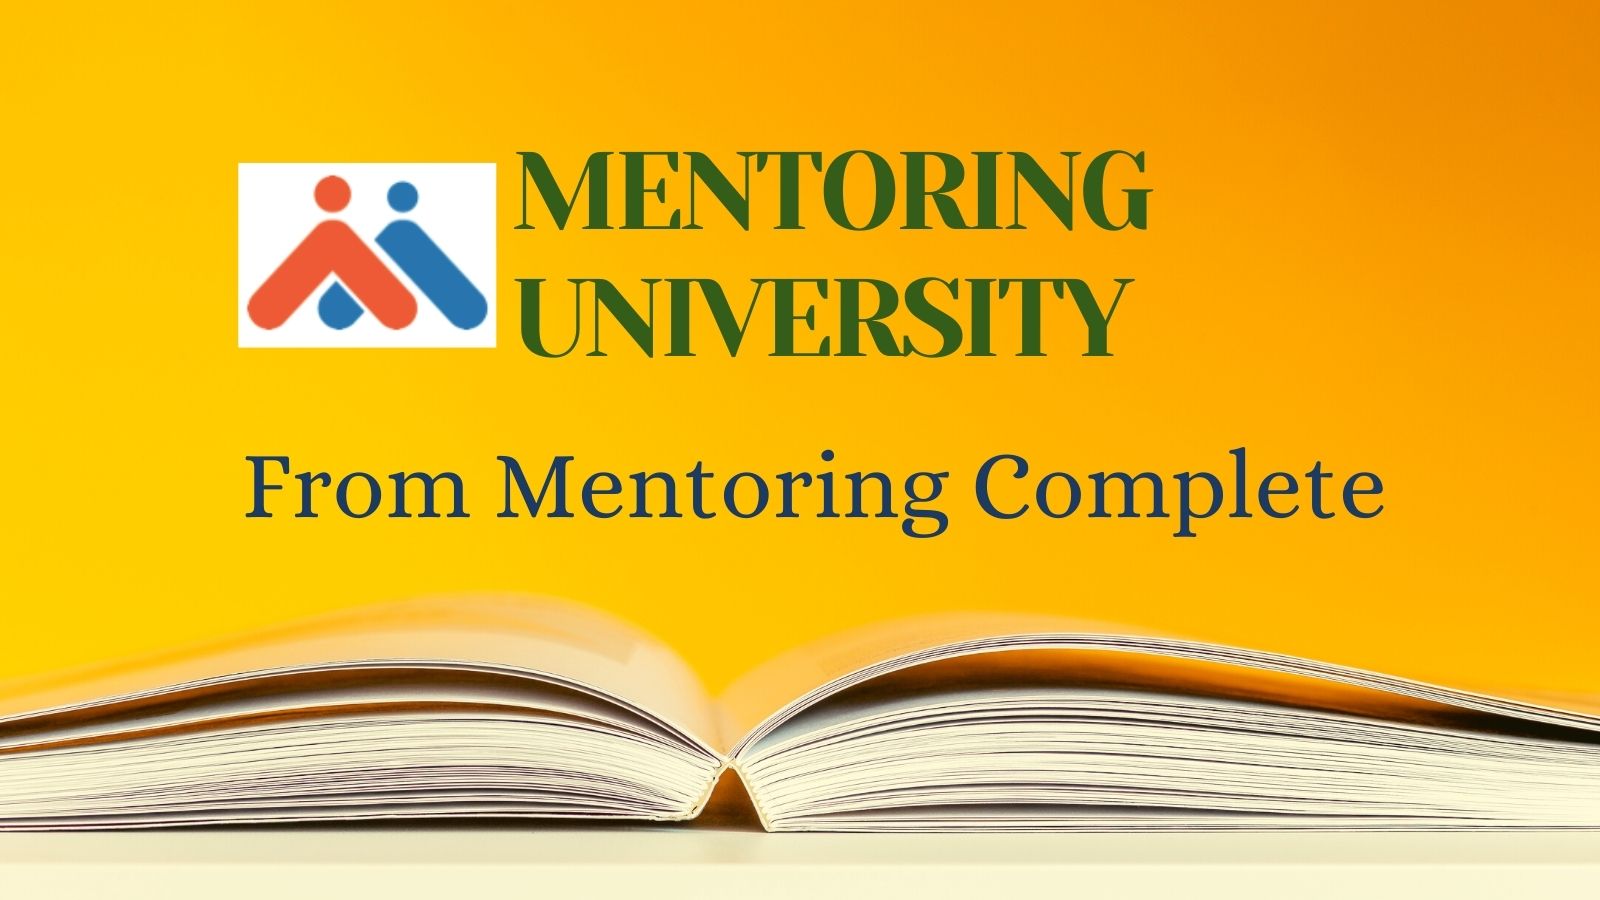 Mentoring University from Mentoring Complete - Mentoring Resources